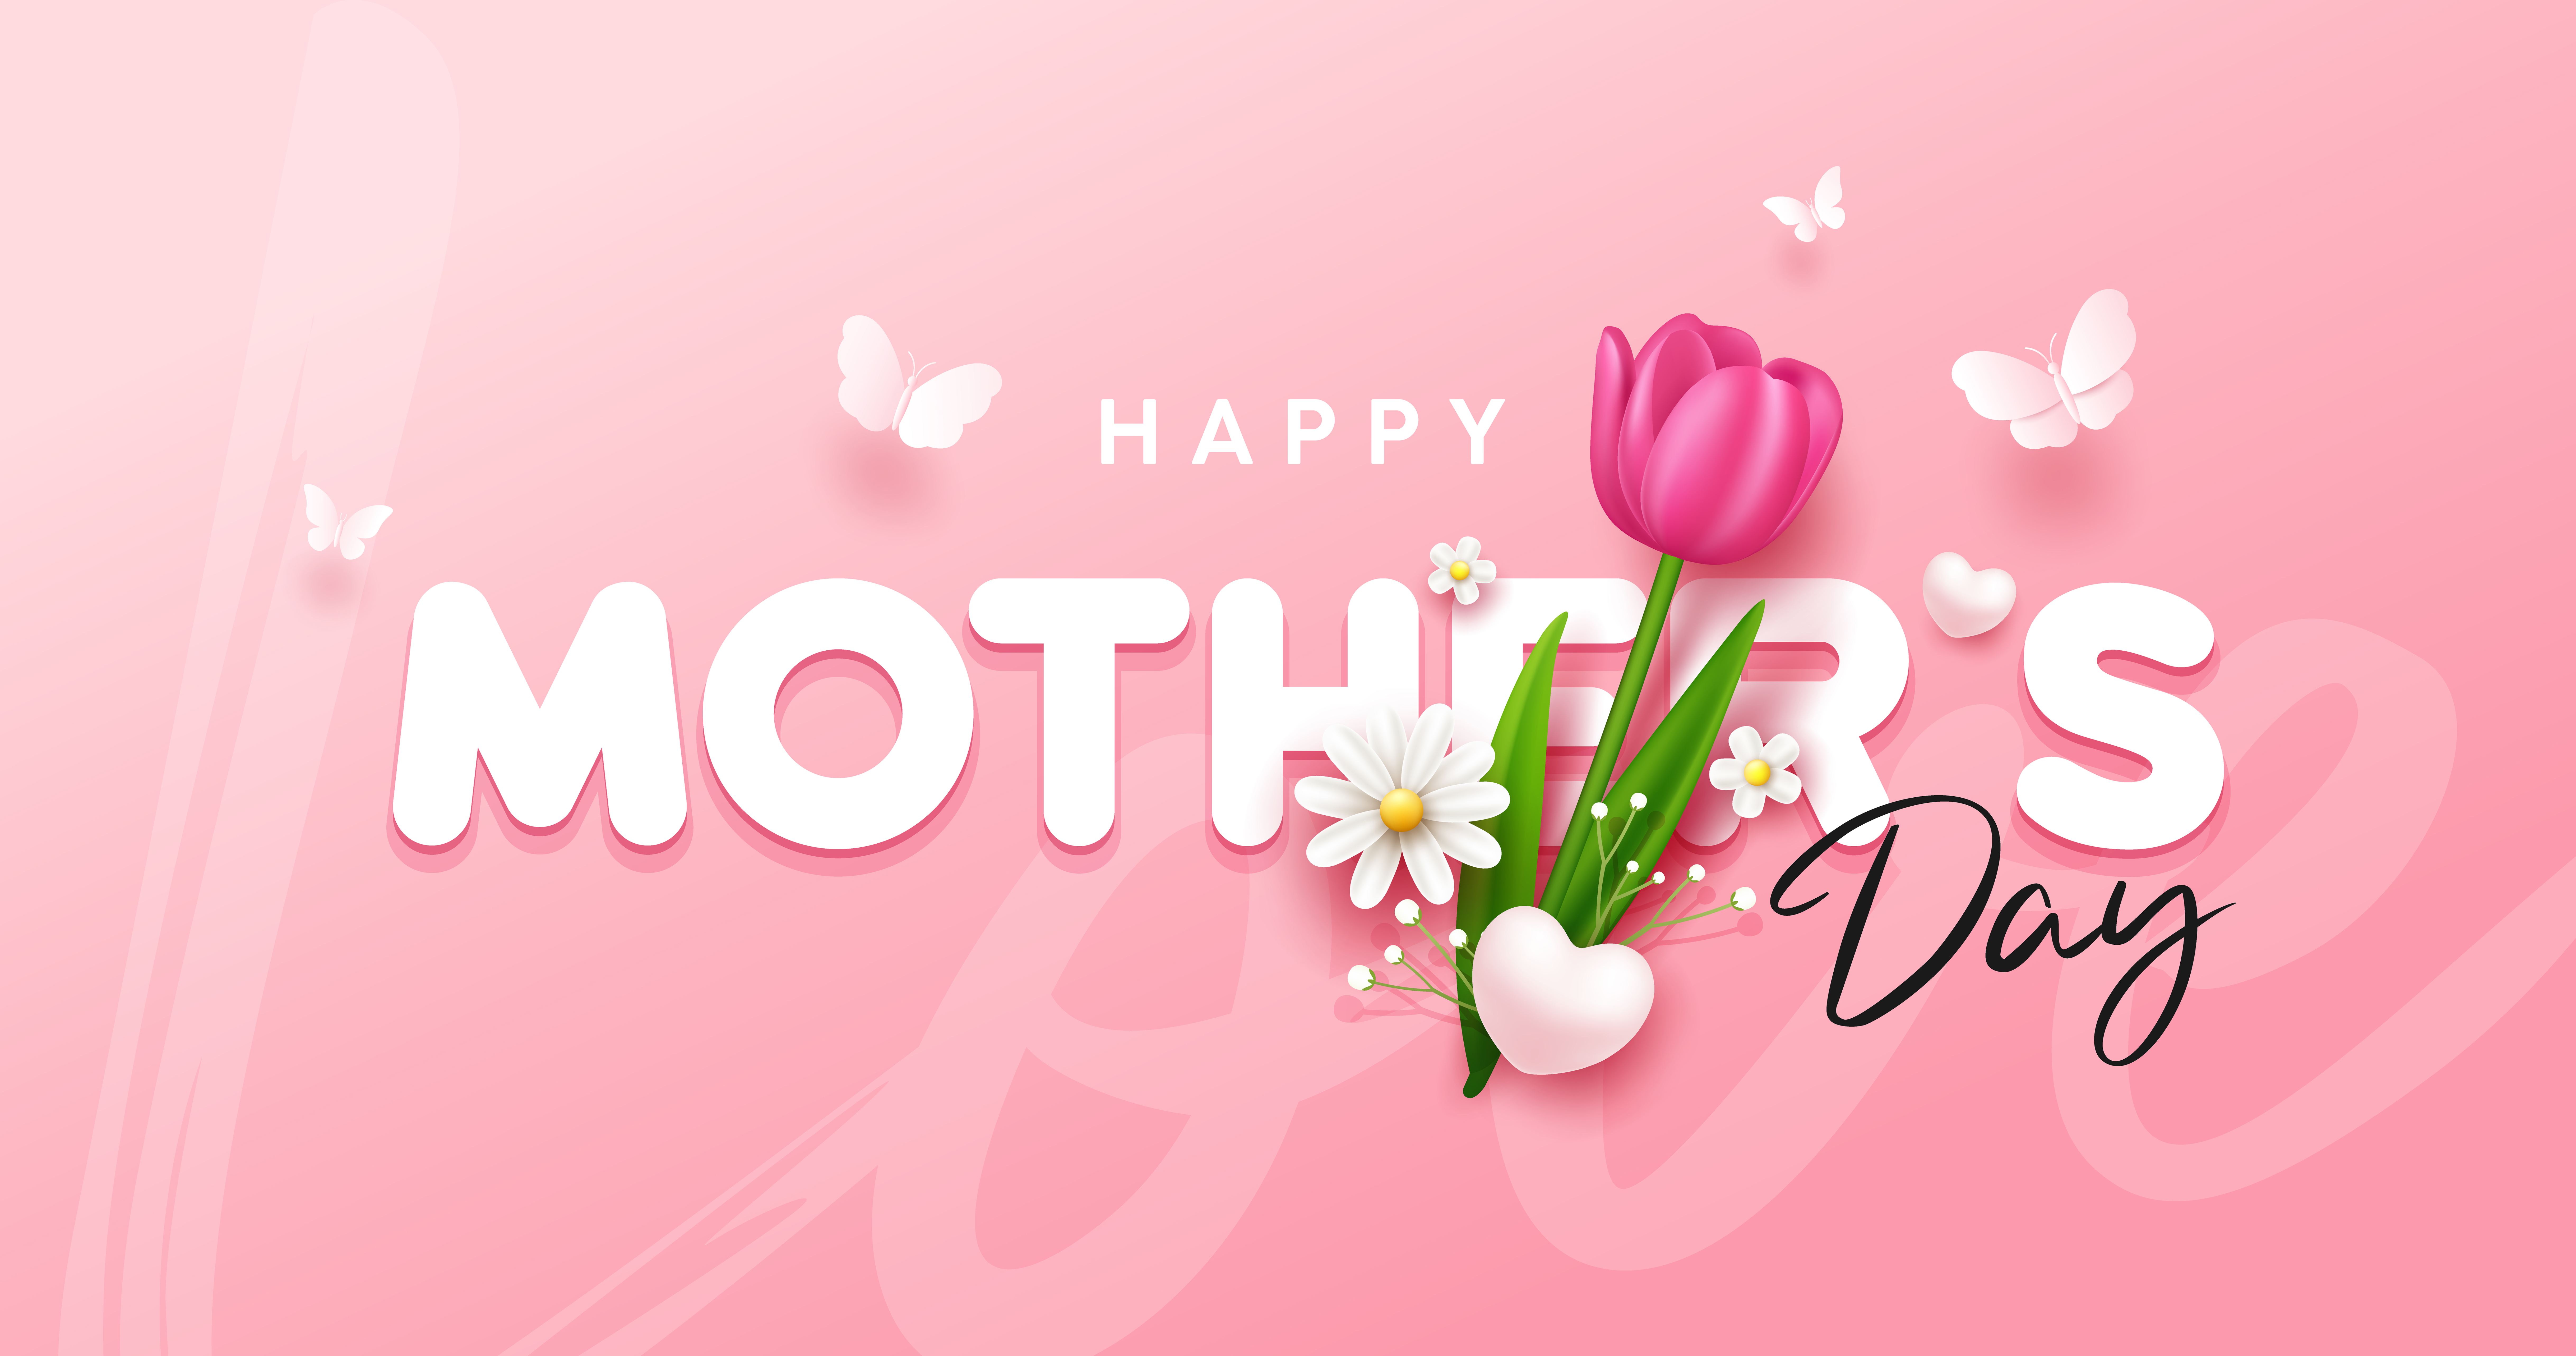 Happy Mother's day with tulip flowers and butterfly banner design on pink background, EPS10 Vector illustration.